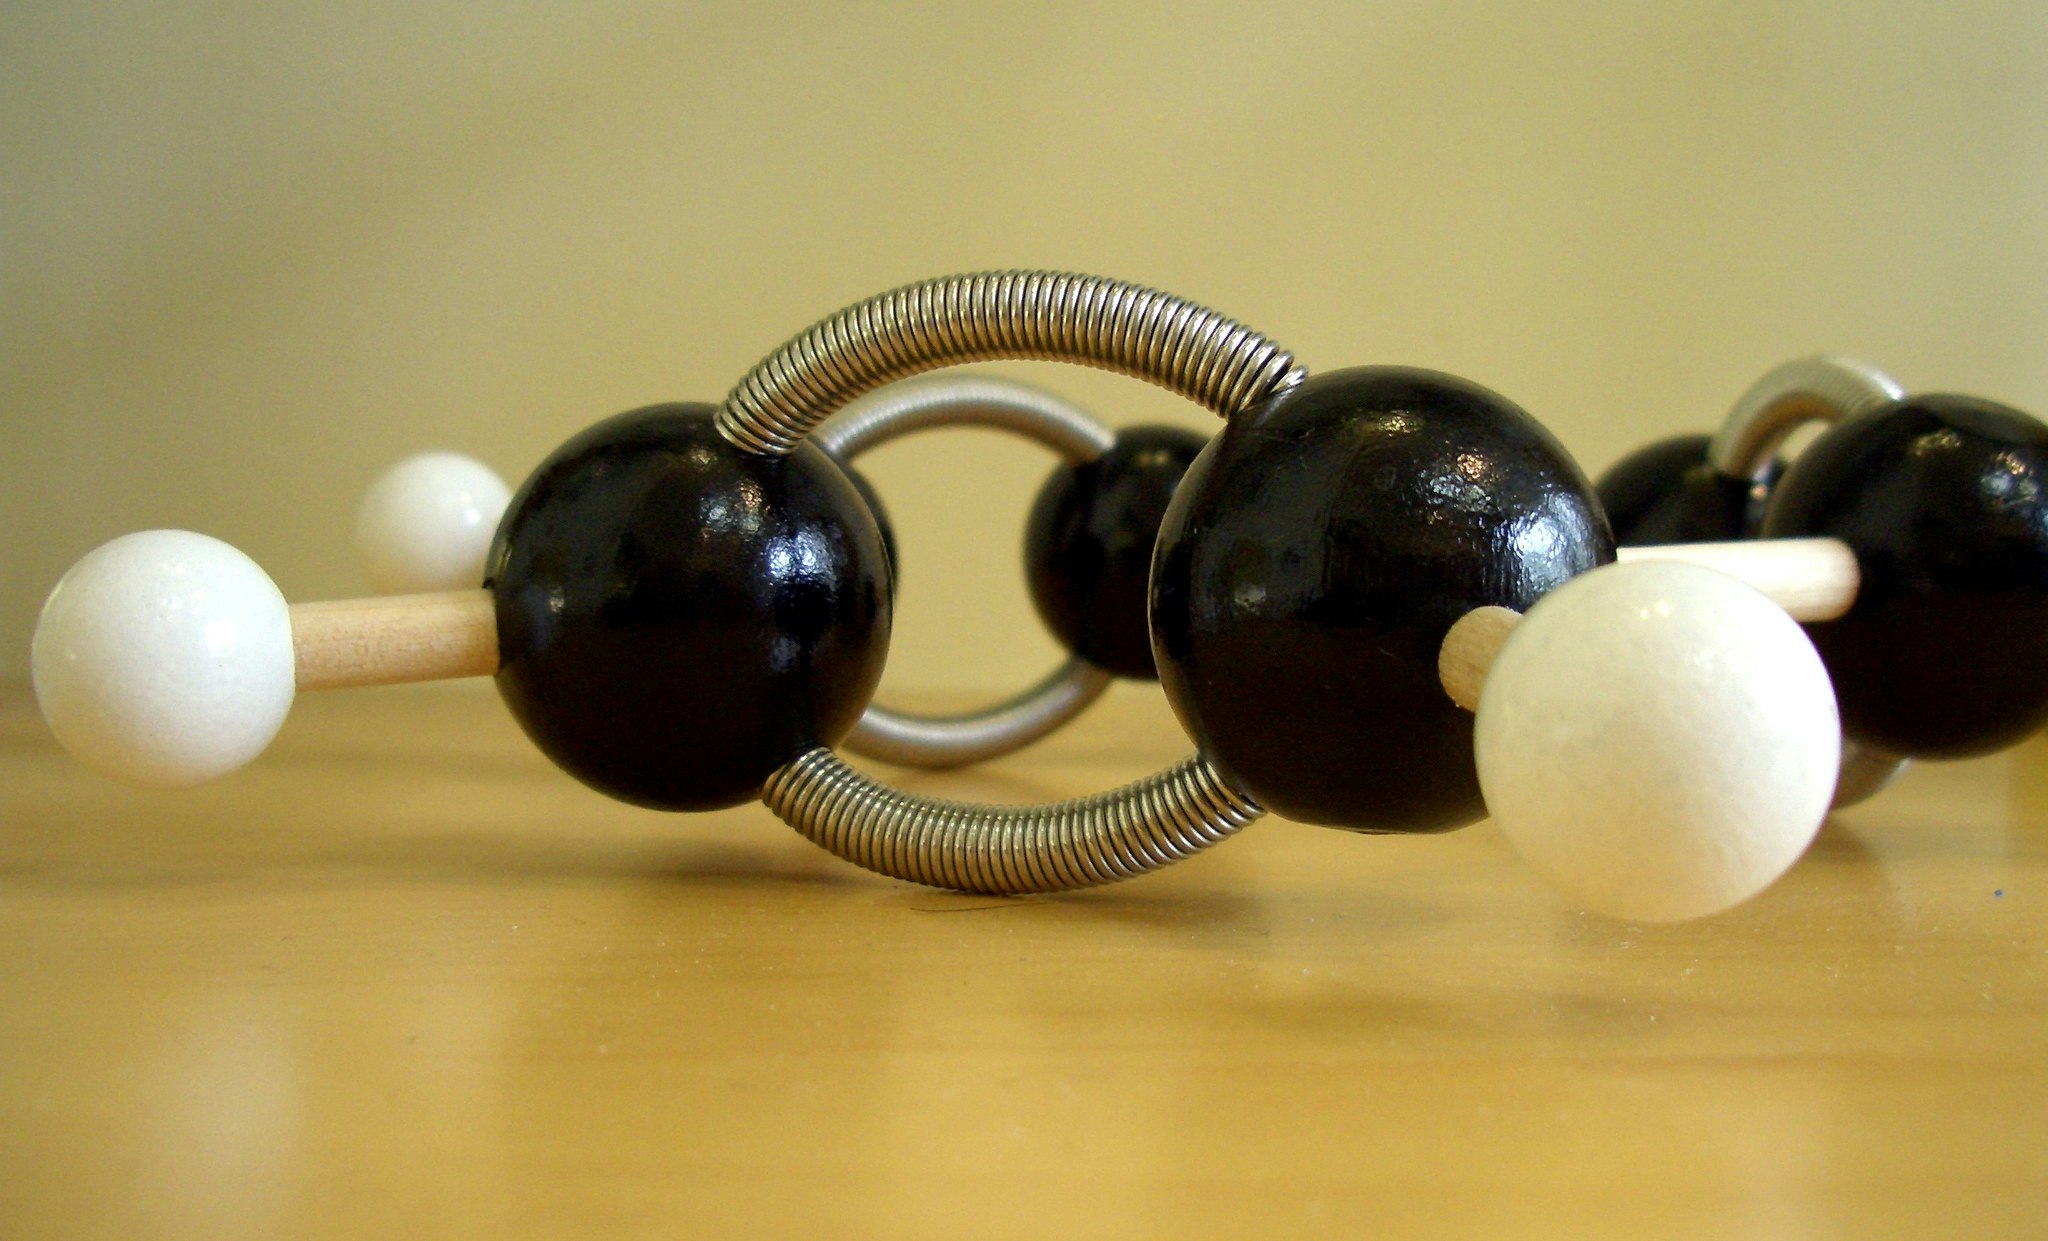 a black and white molecular model made of plastic